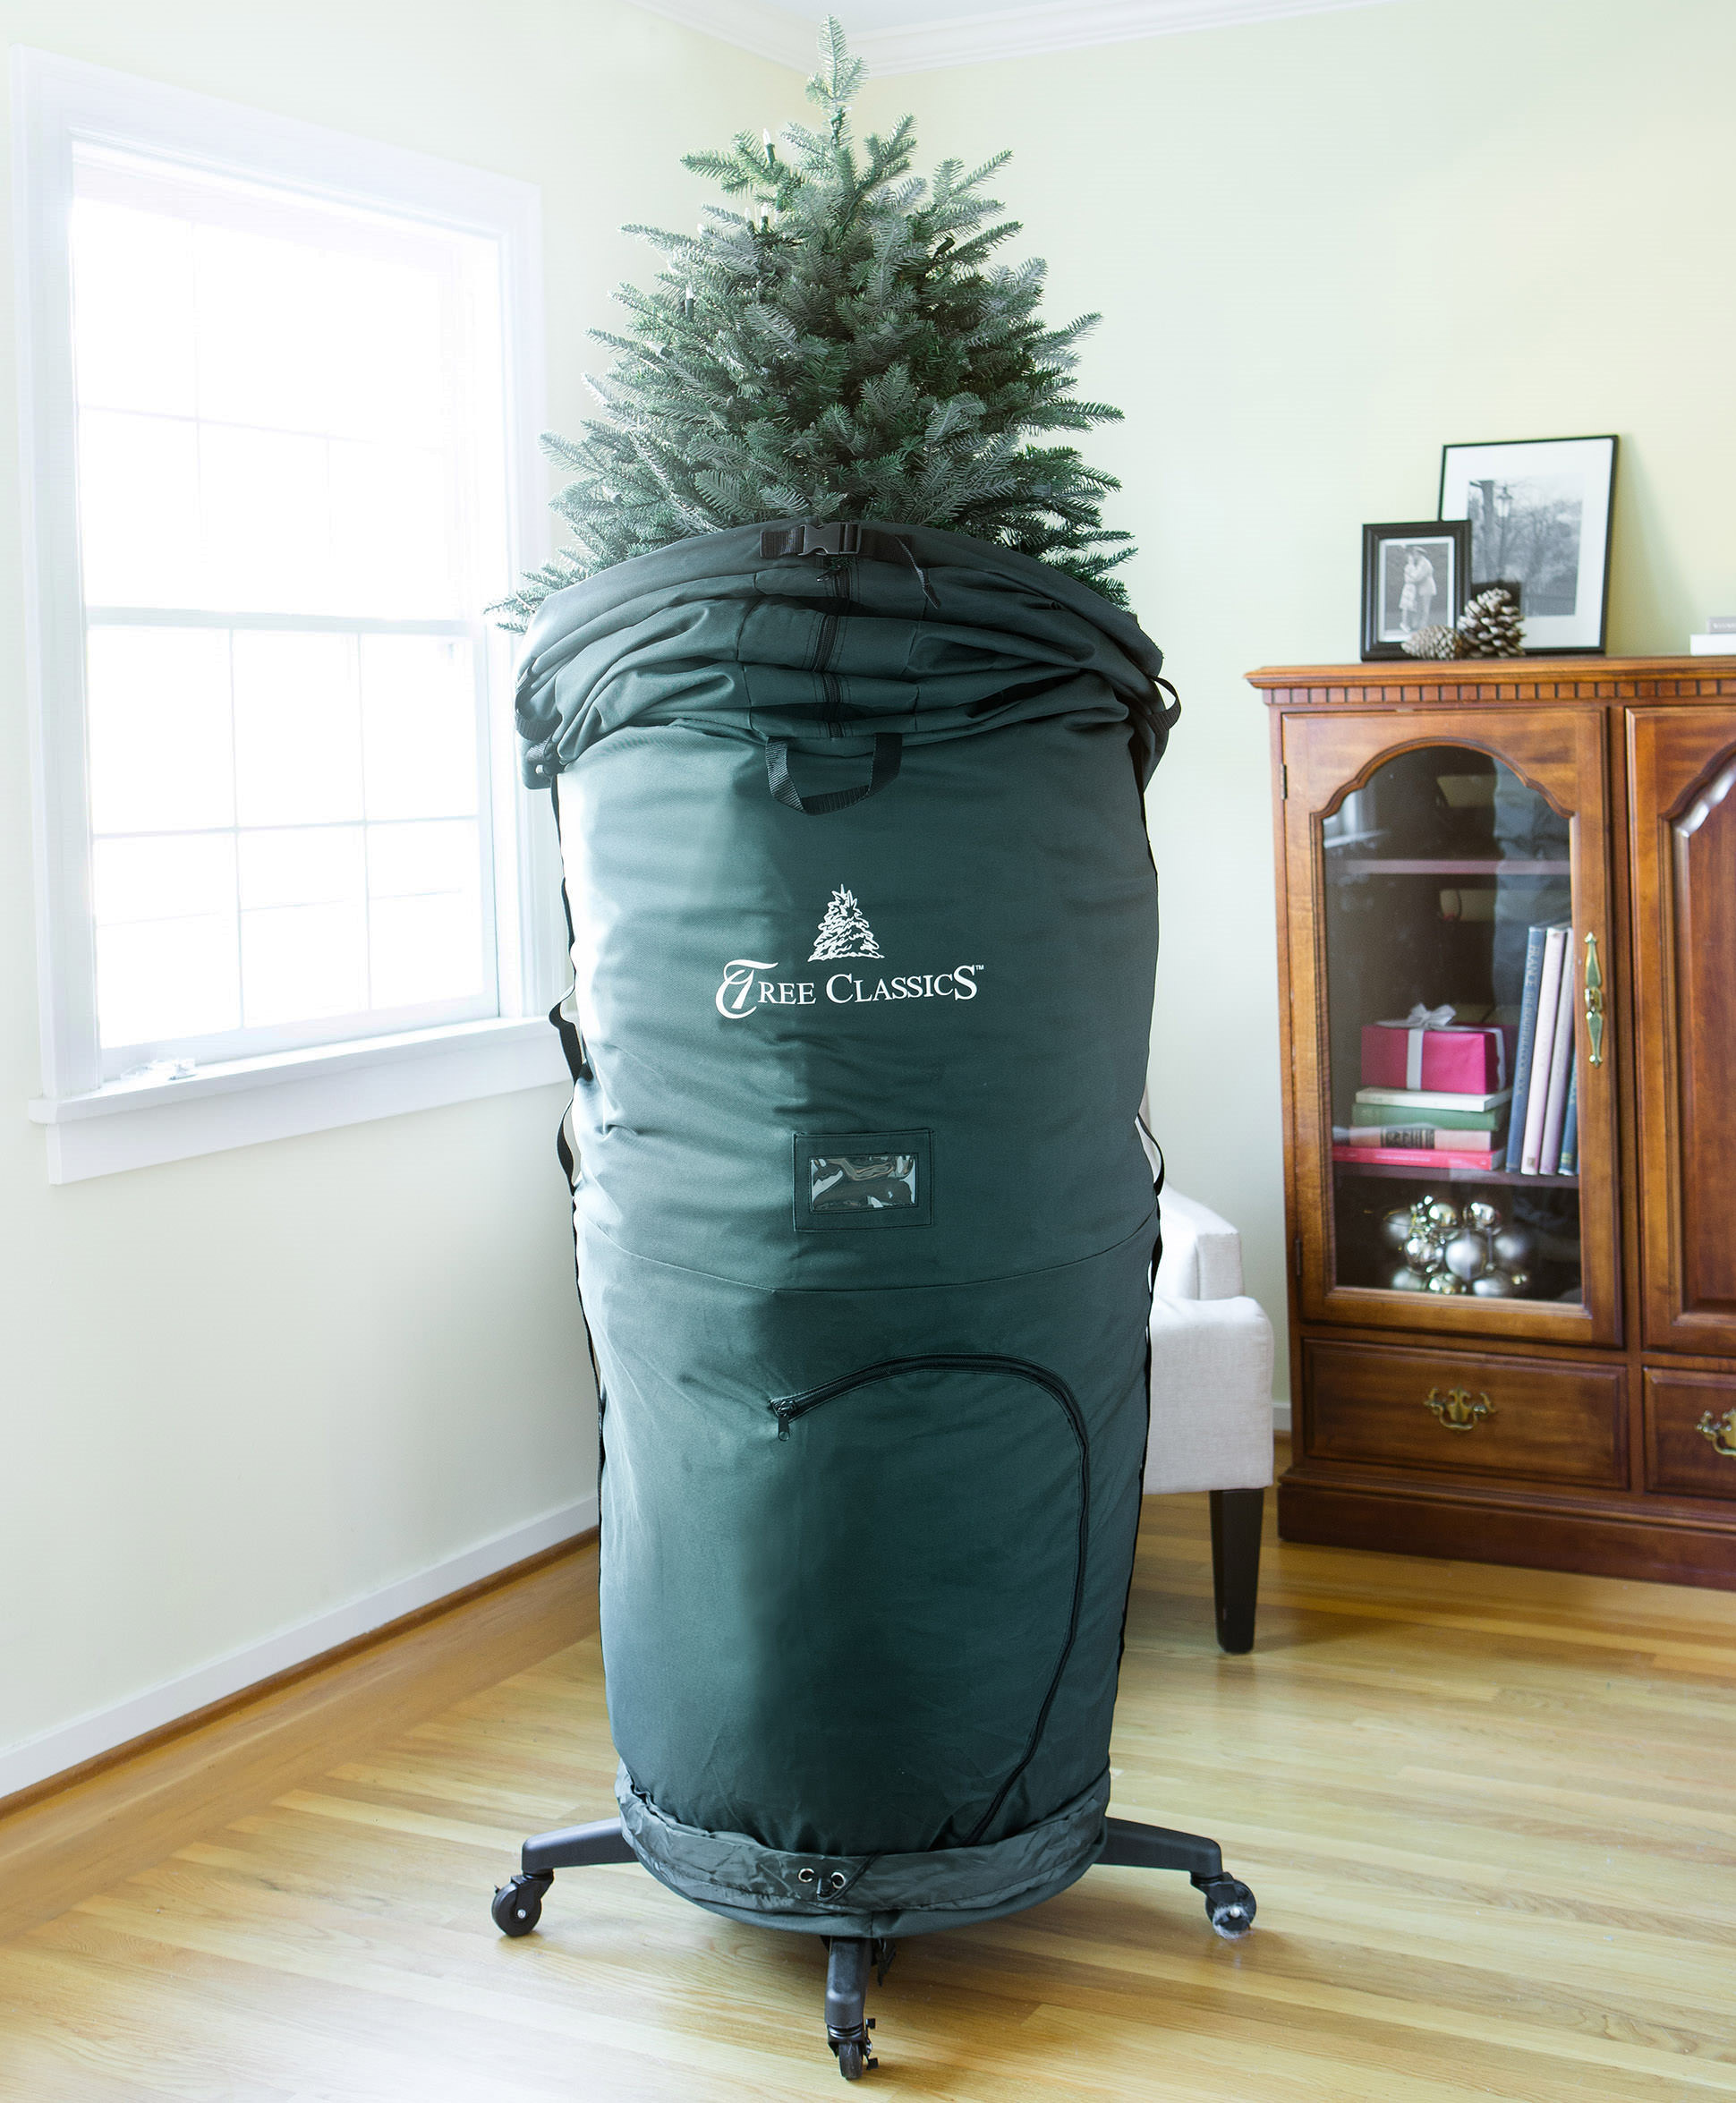 Christmas Tree Rolling Storage Bag
 Deluxe Rolling Christmas Tree Storage Bag